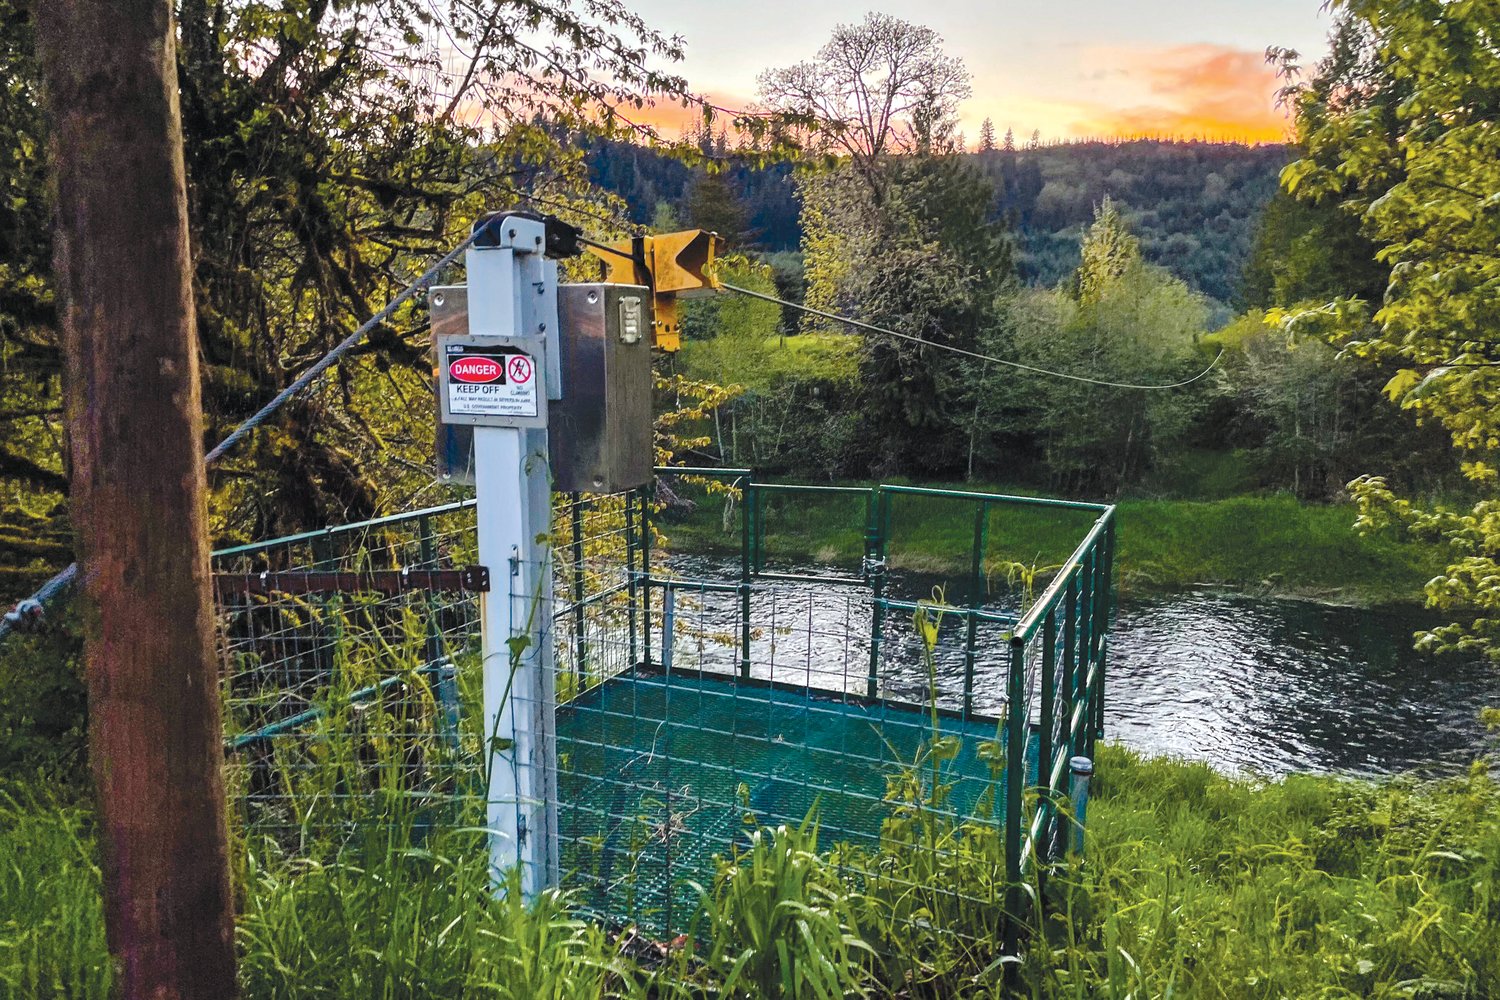 The Doty river gage is seen at sunset off state Route 6.